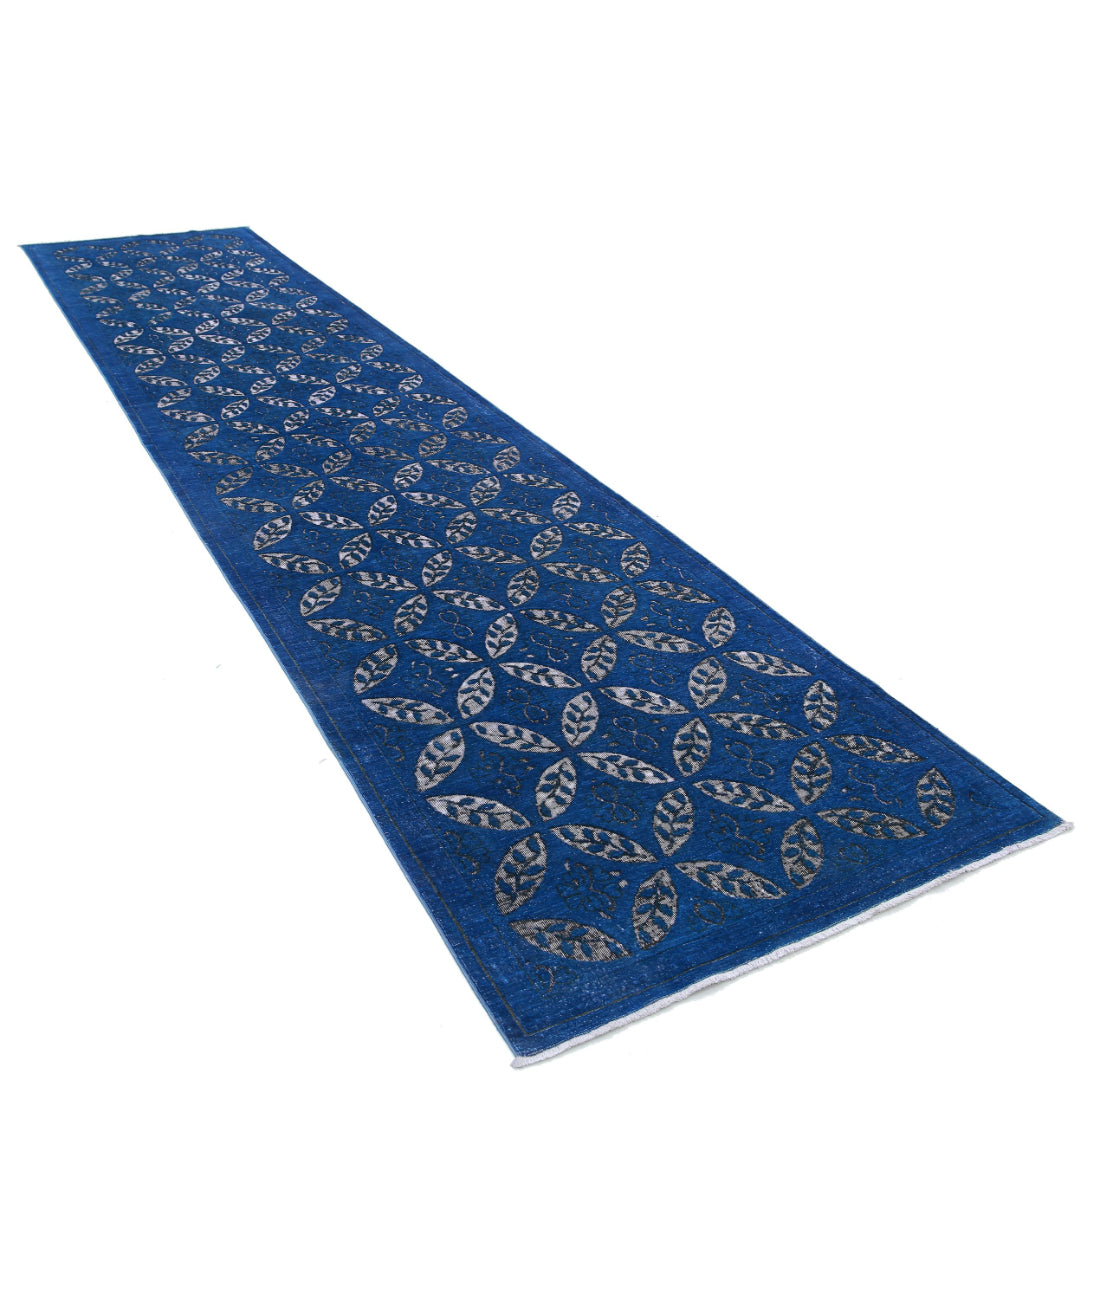 Hand Knotted Onyx Wool Rug - 3'9'' x 16'7'' 3'9'' x 16'7'' (113 X 498) / Blue / Blue